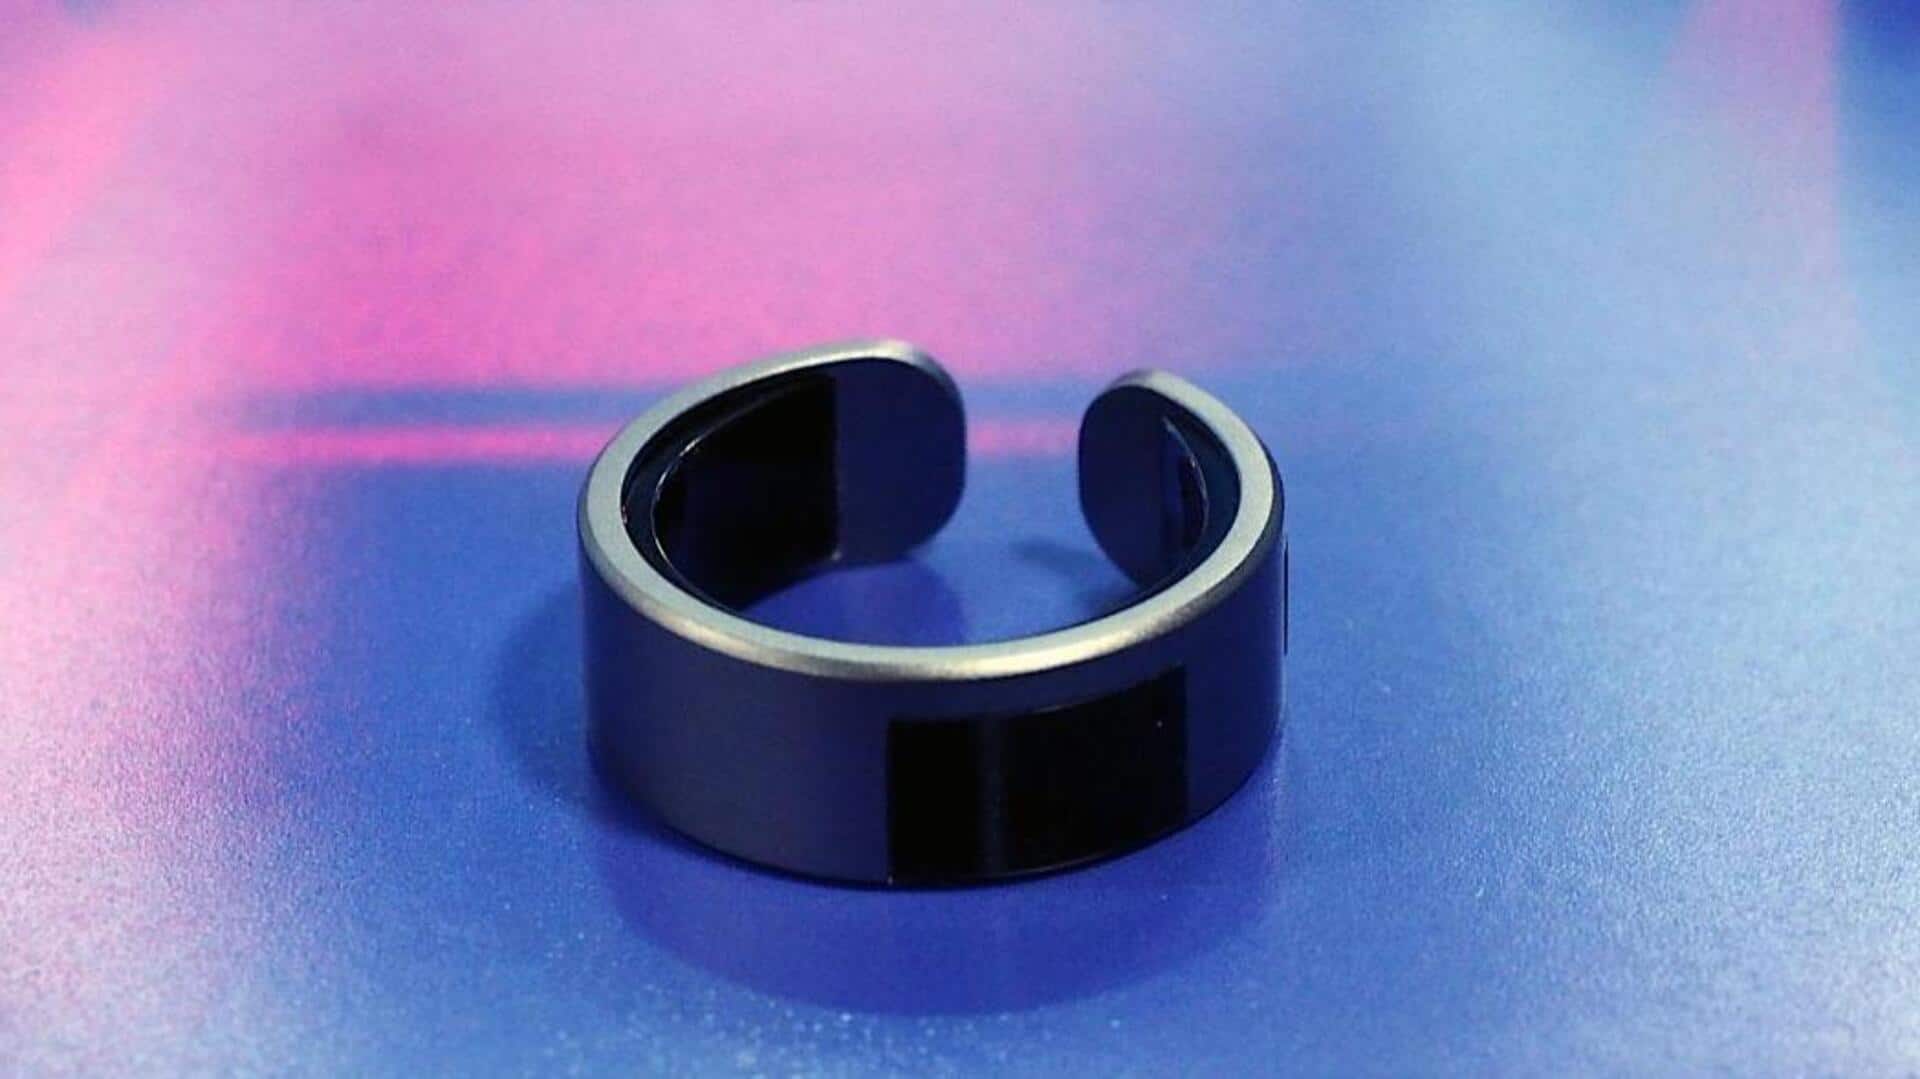 Using this ring, you can whisper to your AI assistant